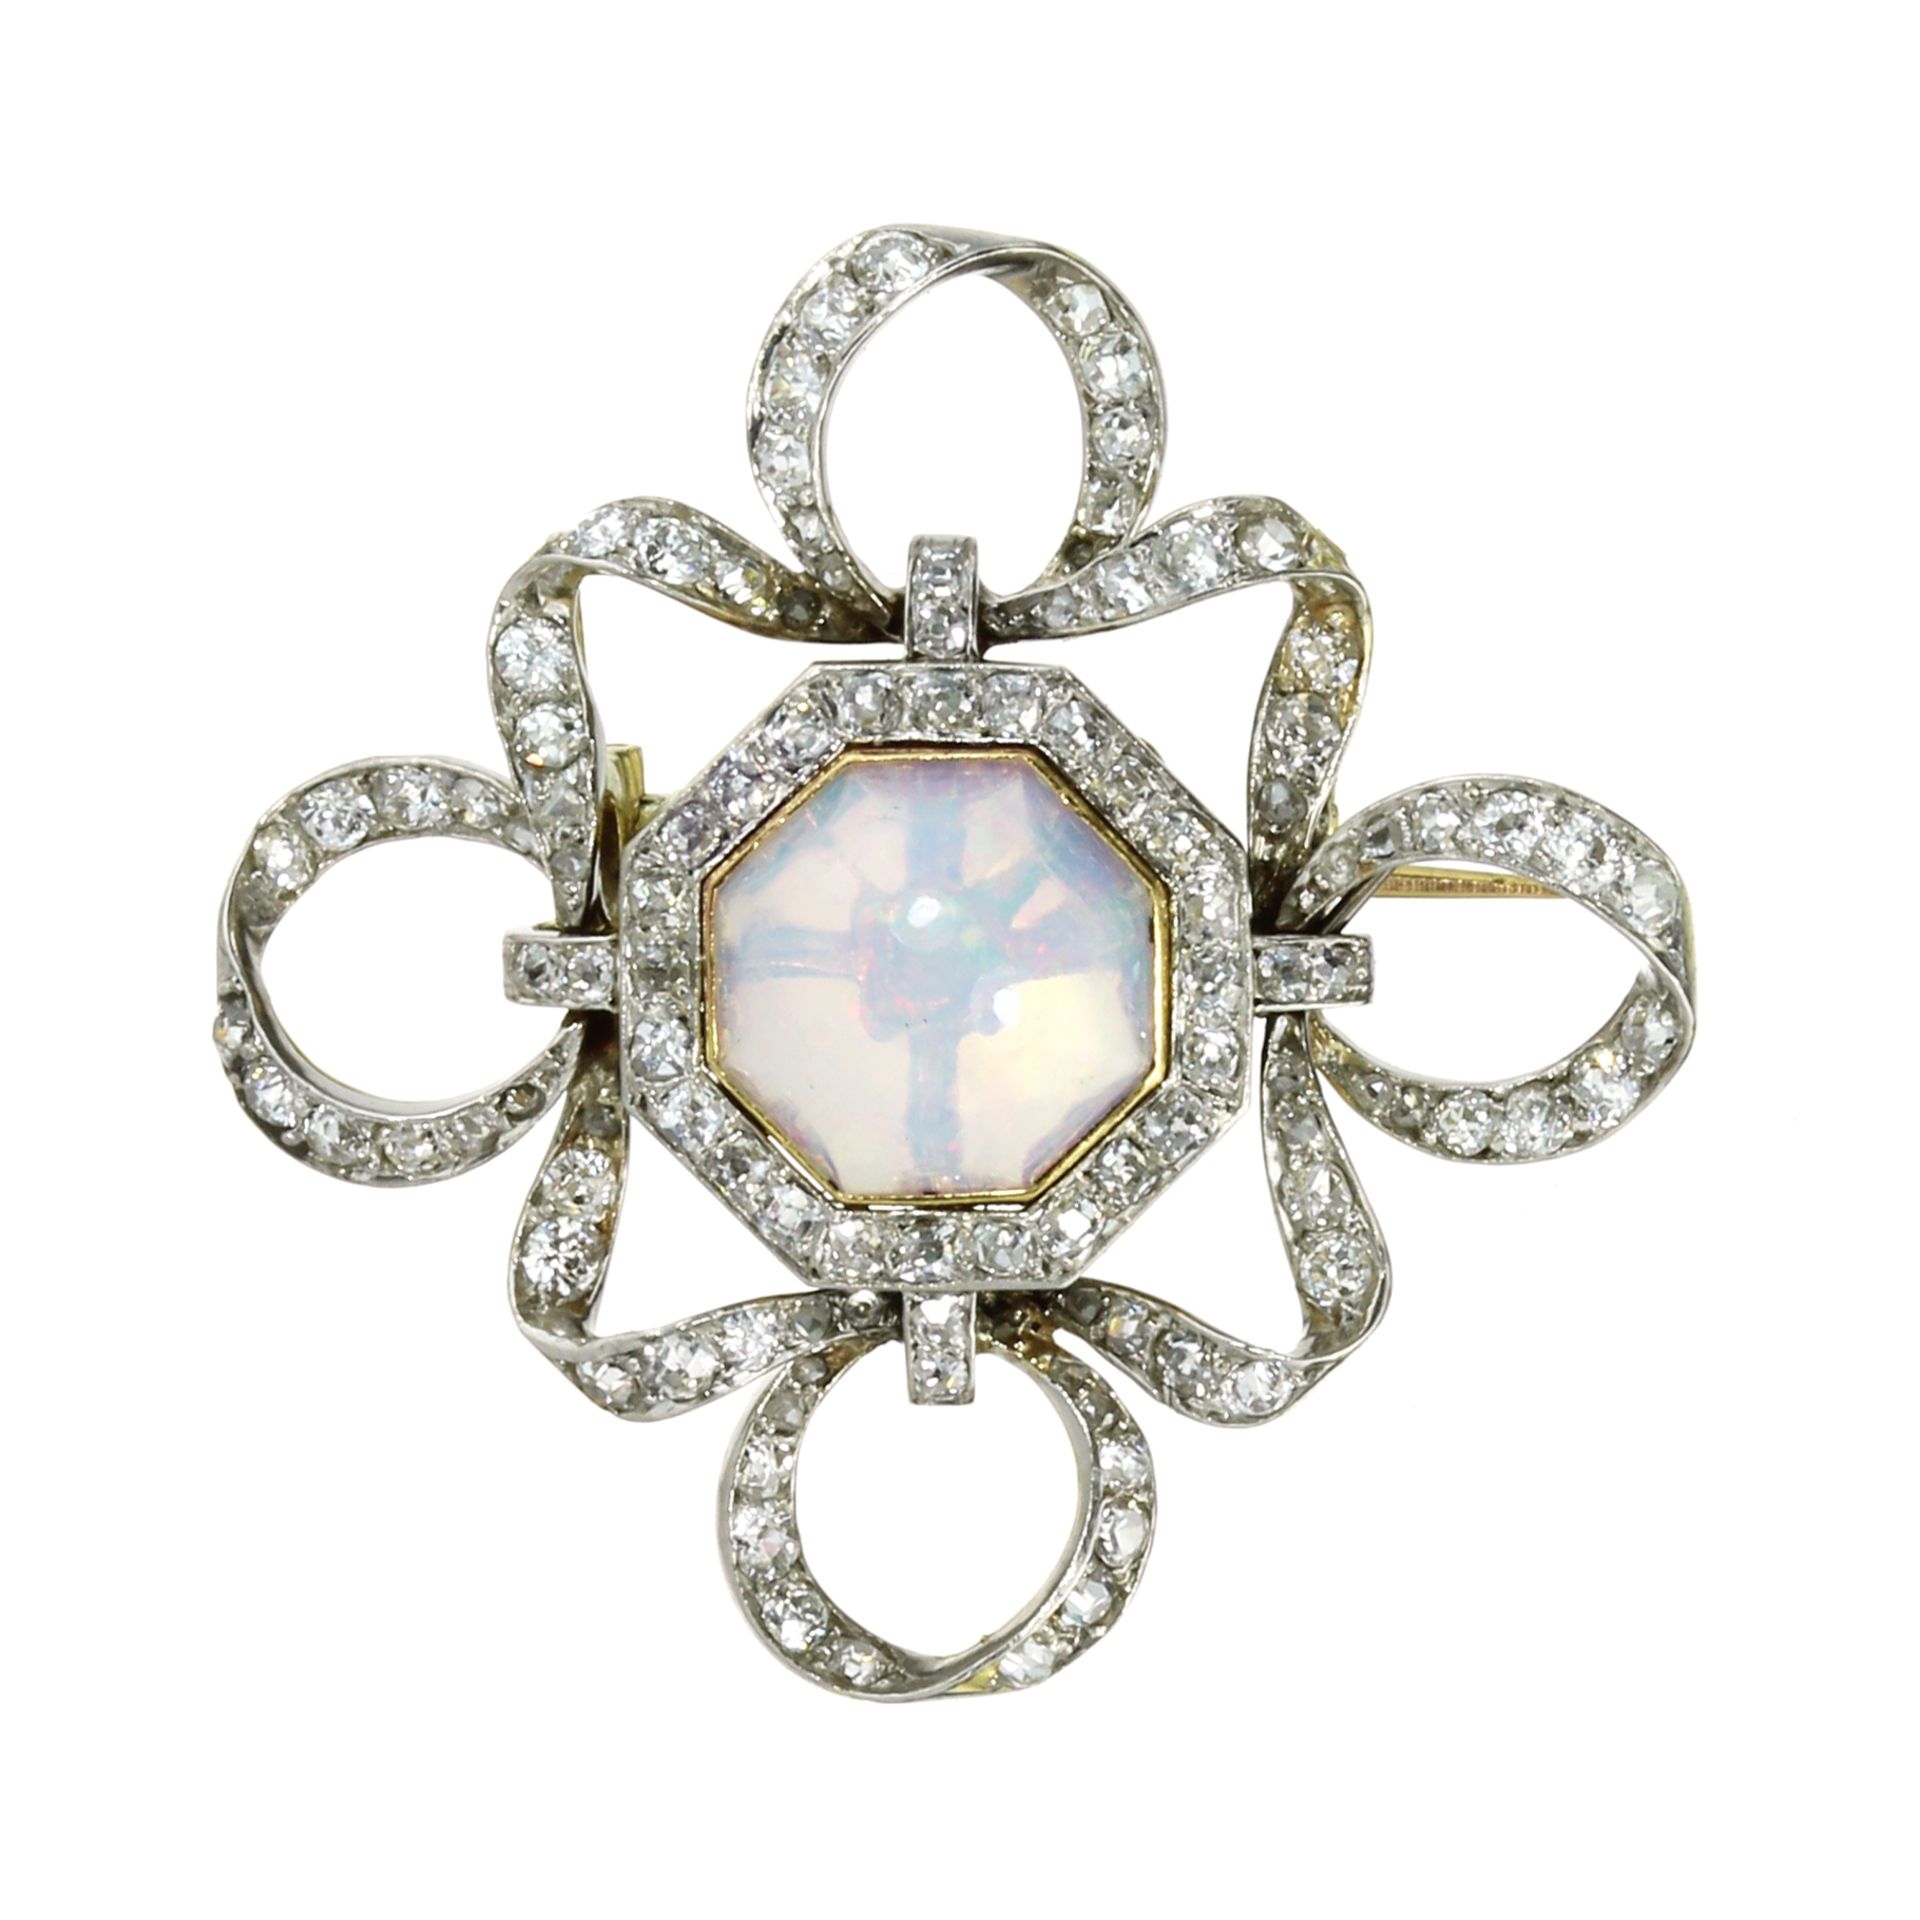 AN ANTIQUE OPAL AND DIAMOND BROOCH / PENDANT in 18ct yellow gold and platinum set with an